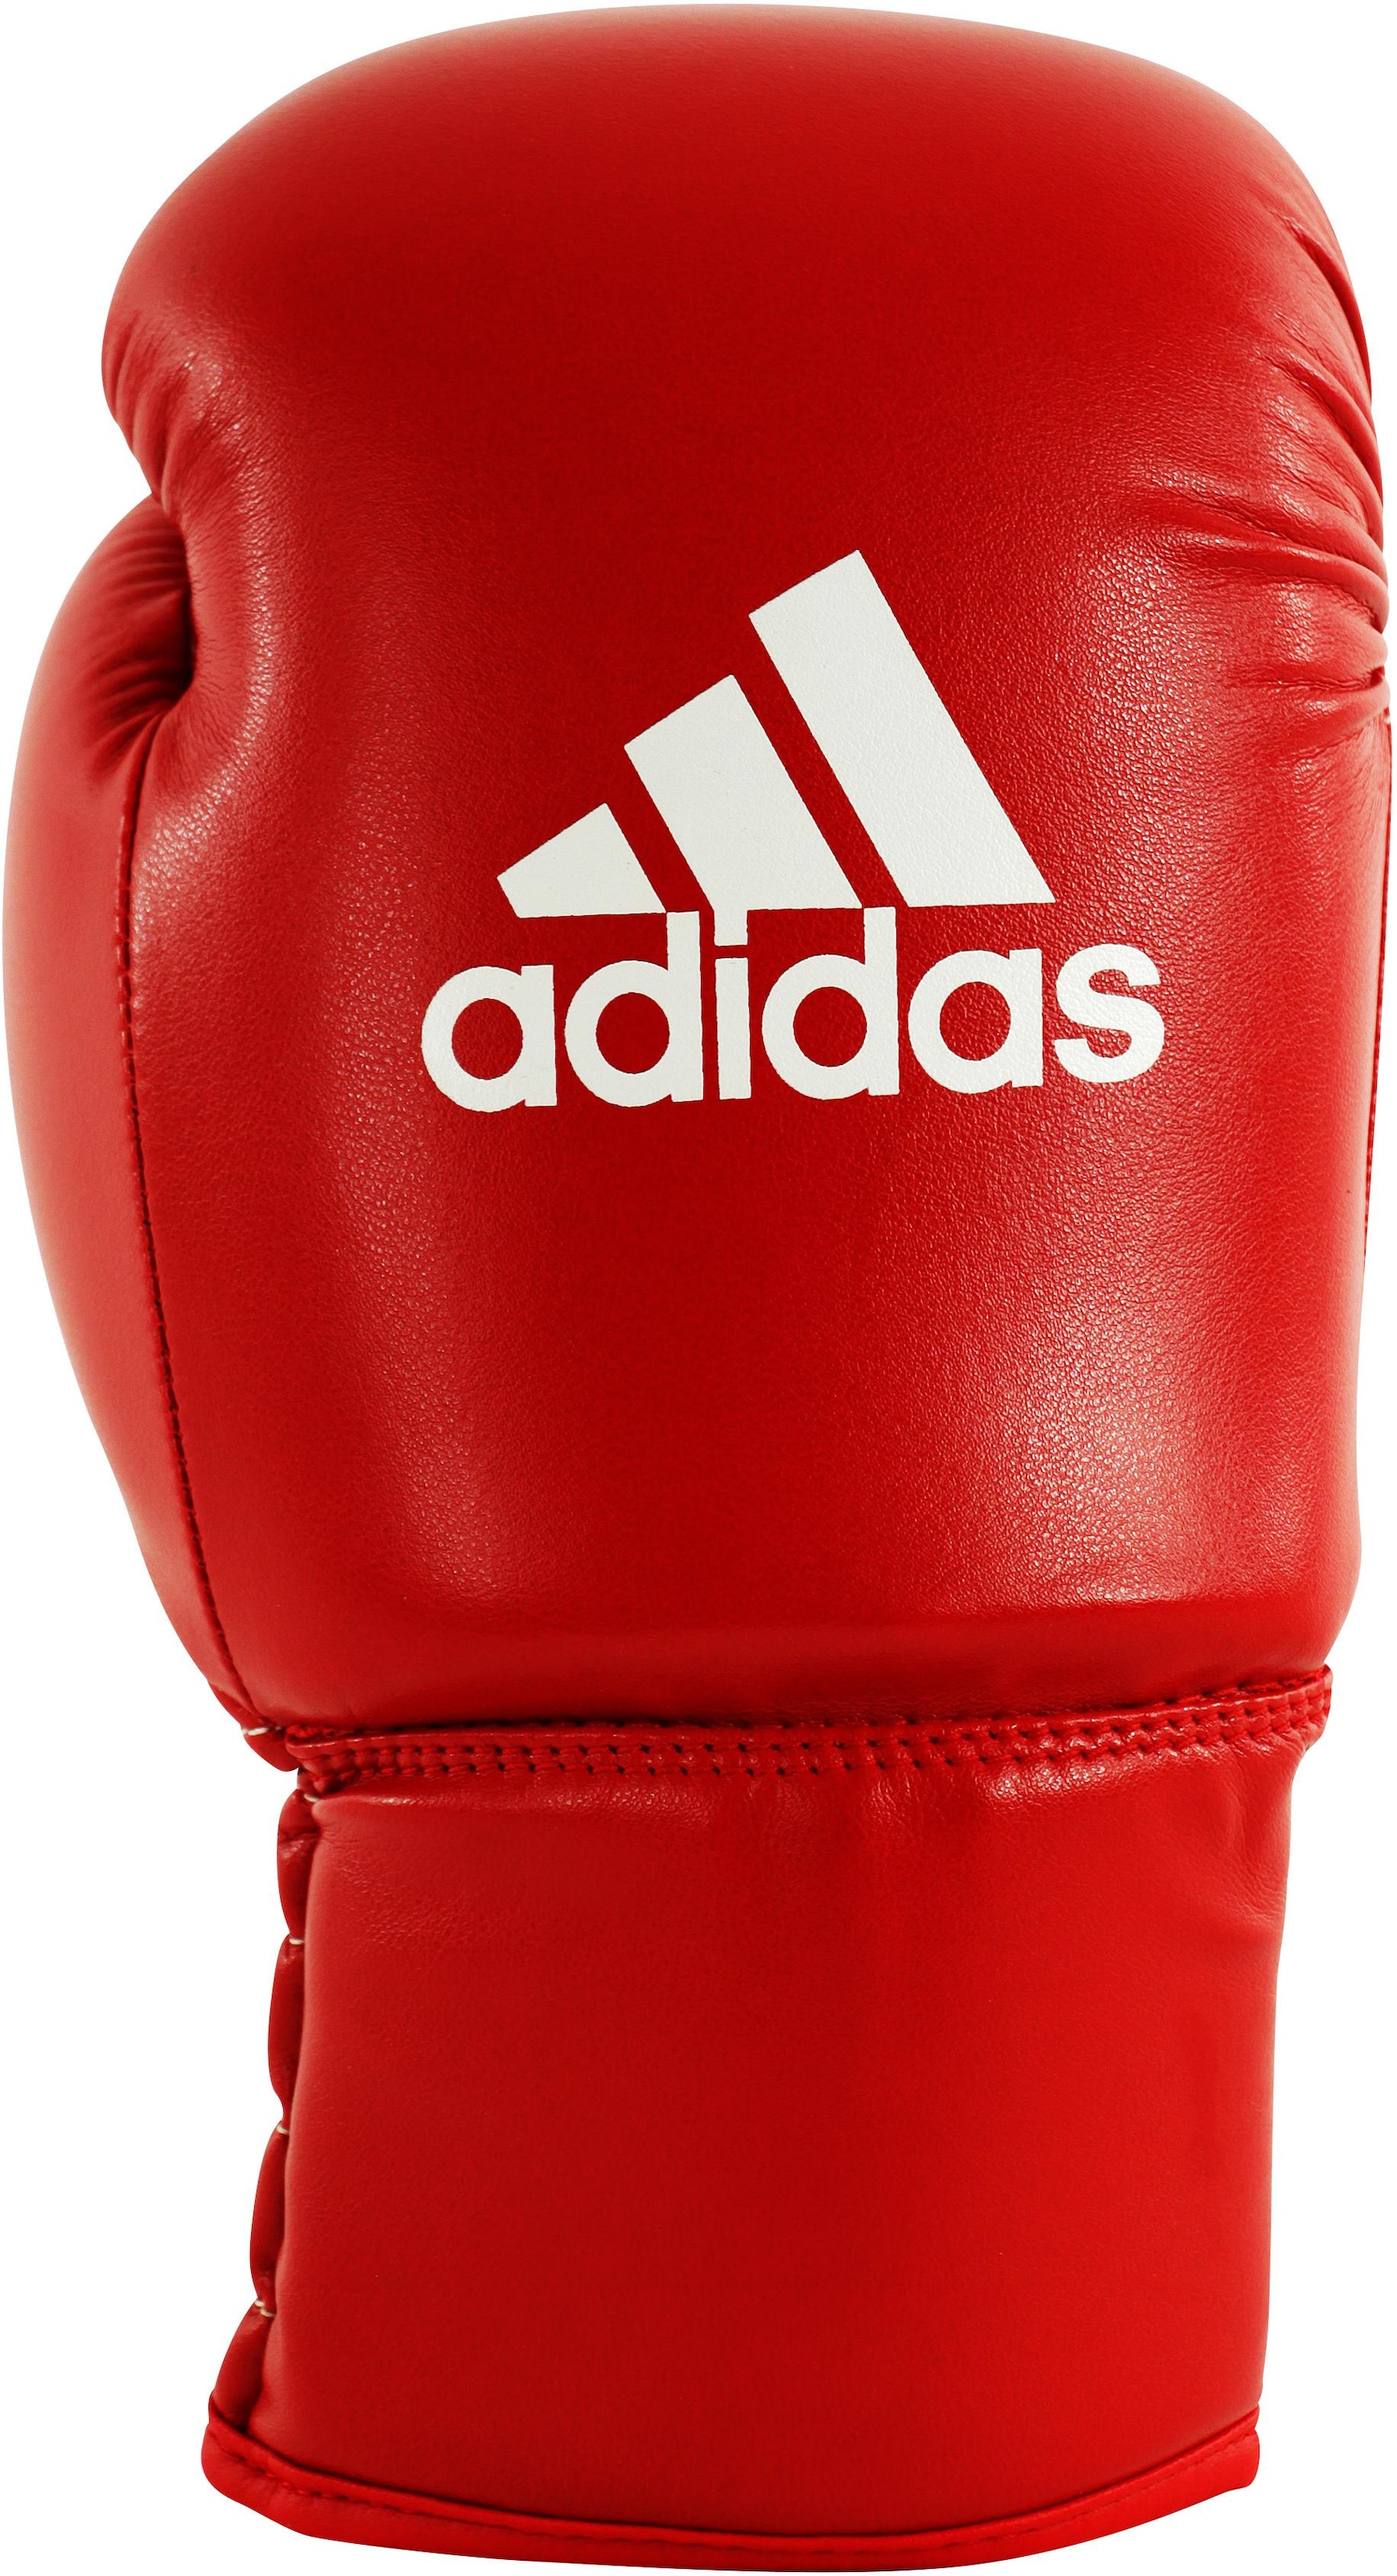 OTTO Boxhandschuhe adidas »ROOKIE« Performance bei online